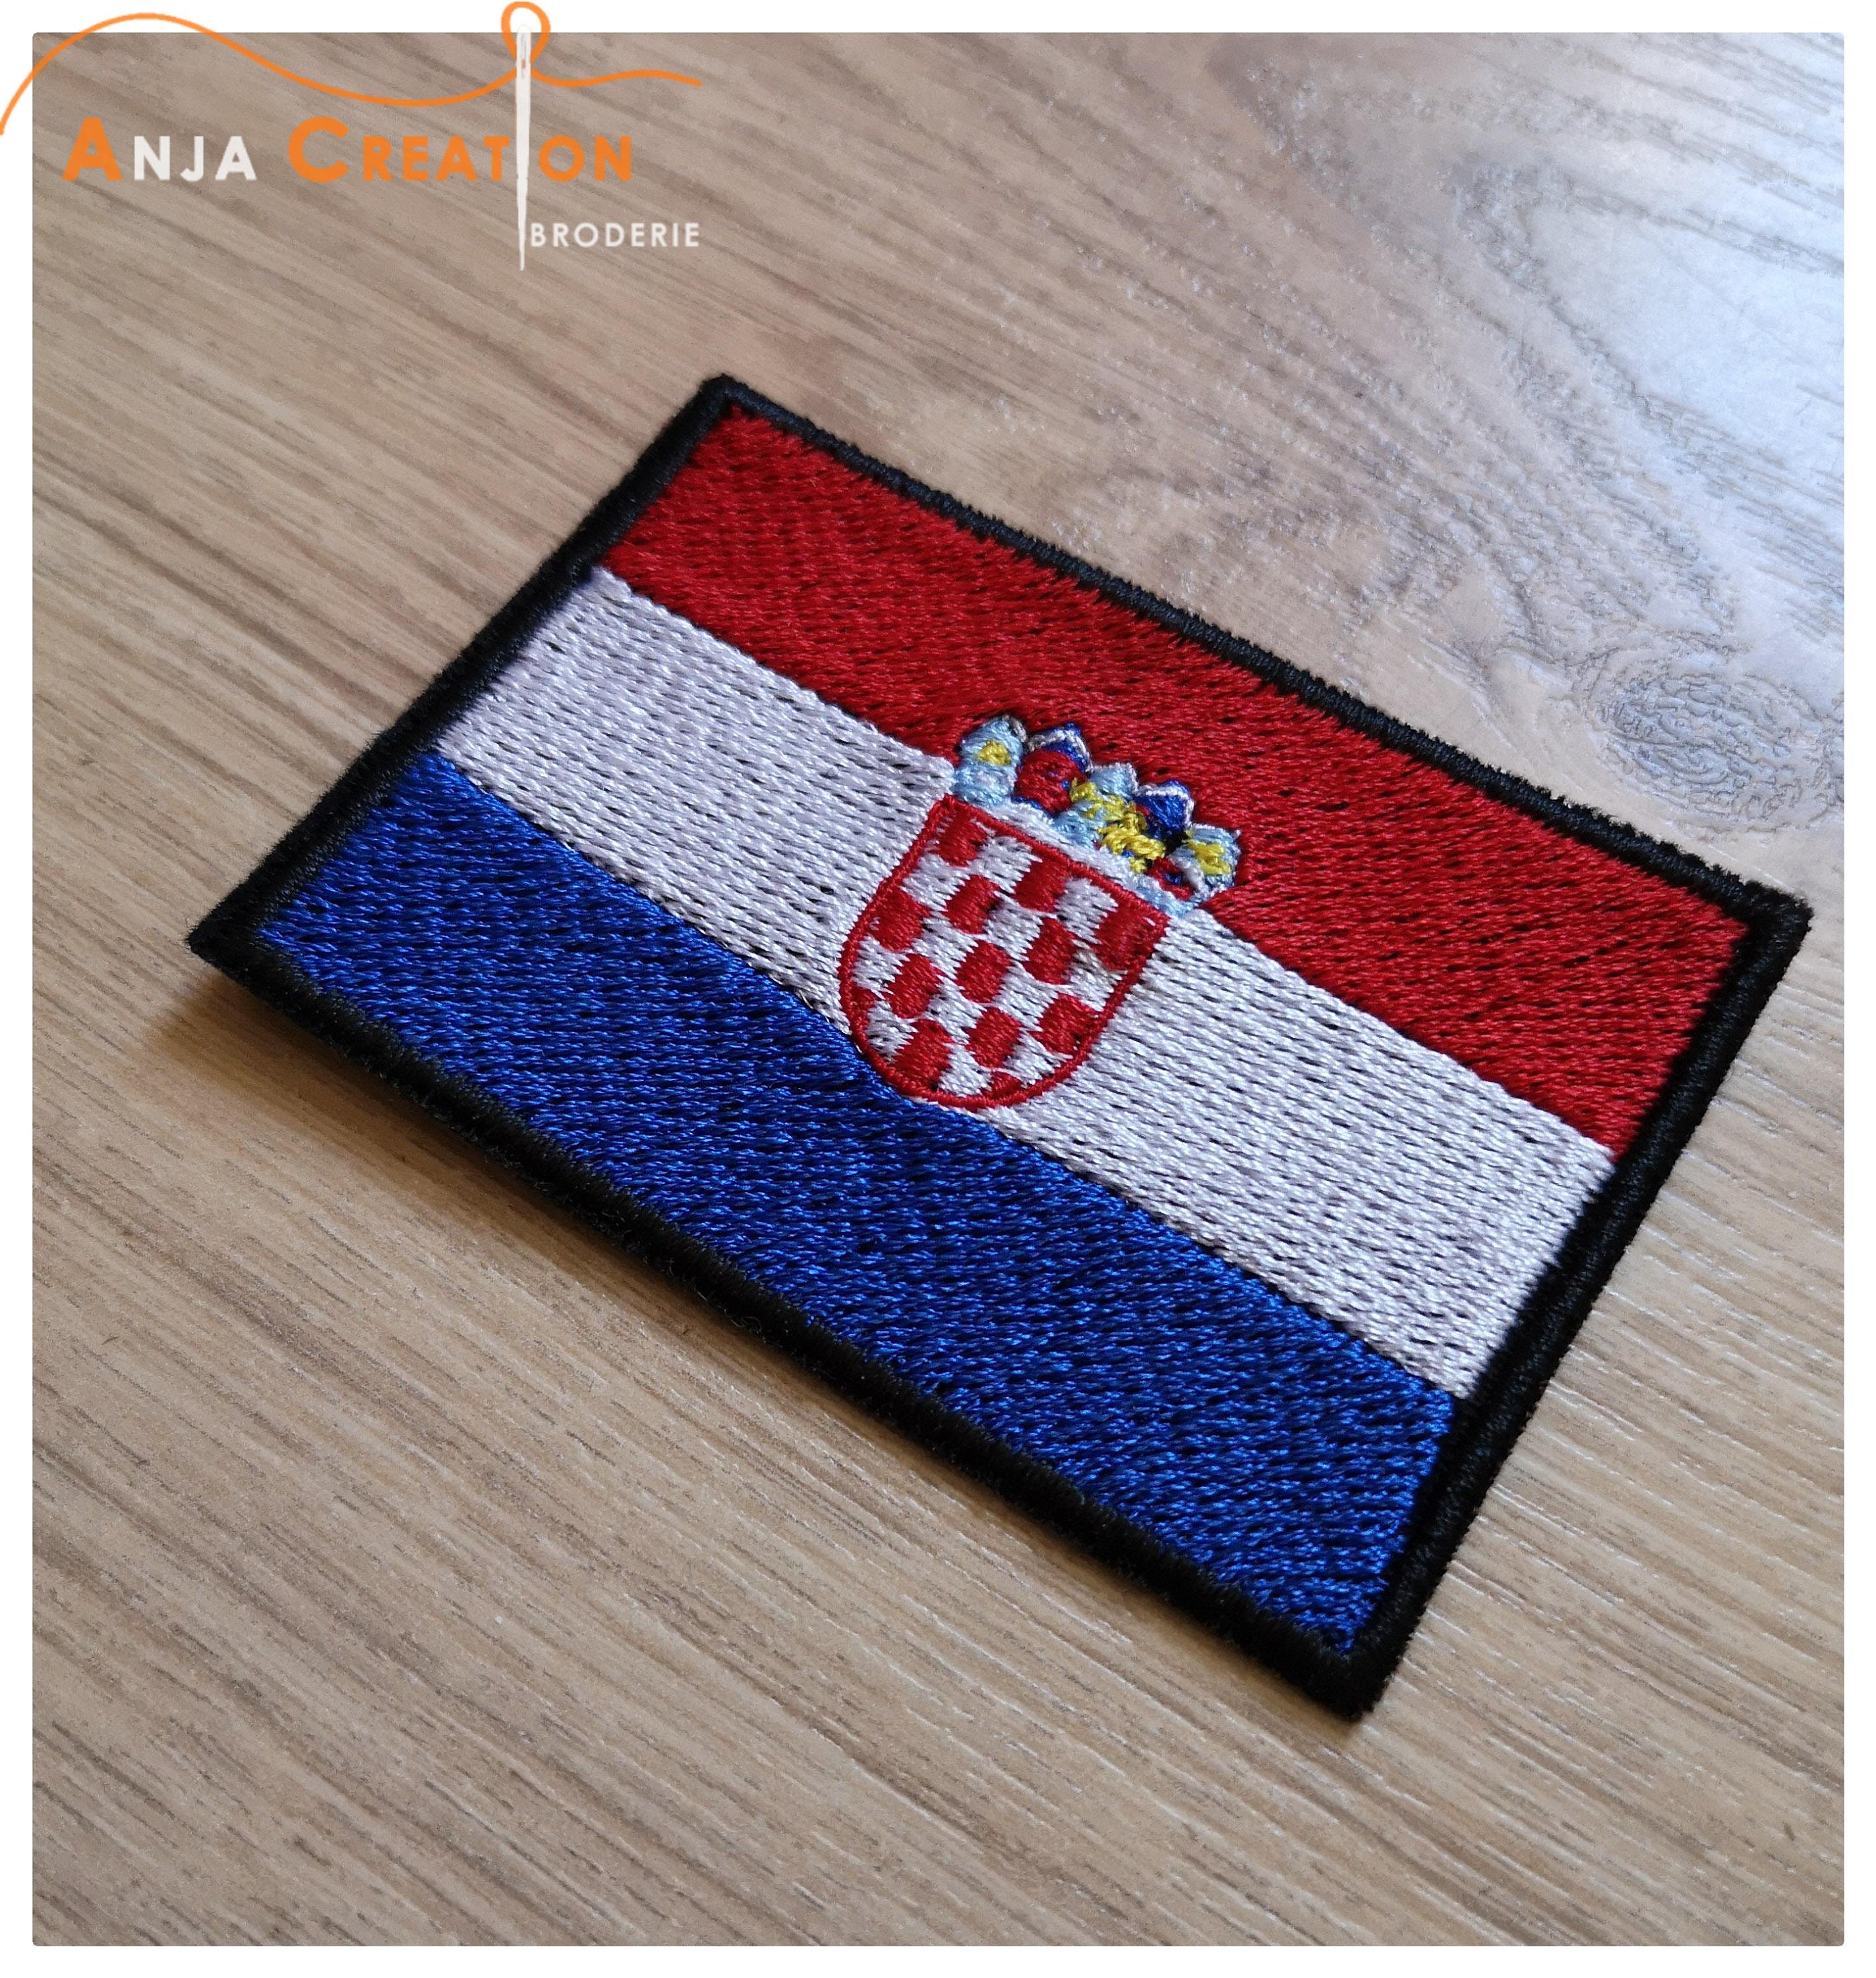 40 x 25 mm Croatia Zagreb Flag embroidered Iron-On Patch 0917 A 